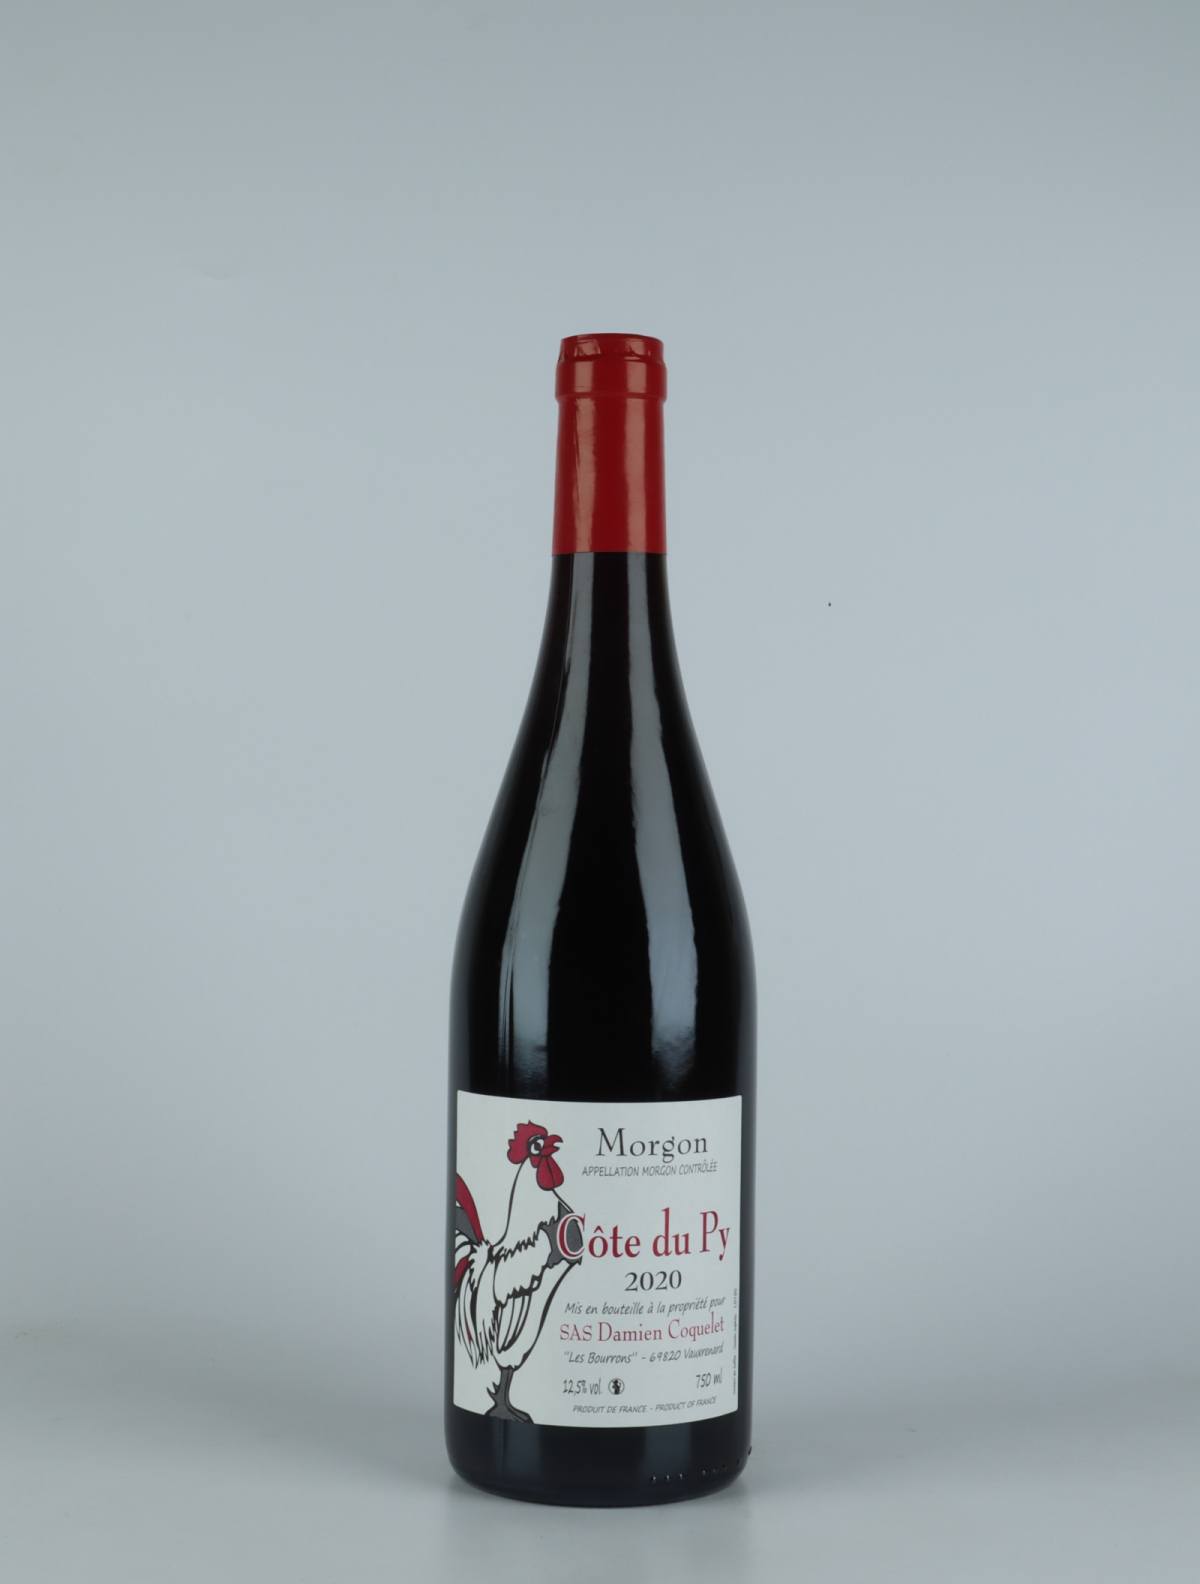 A bottle 2020 Morgon - Côte du Py Red wine from Damien Coquelet, Beaujolais in France